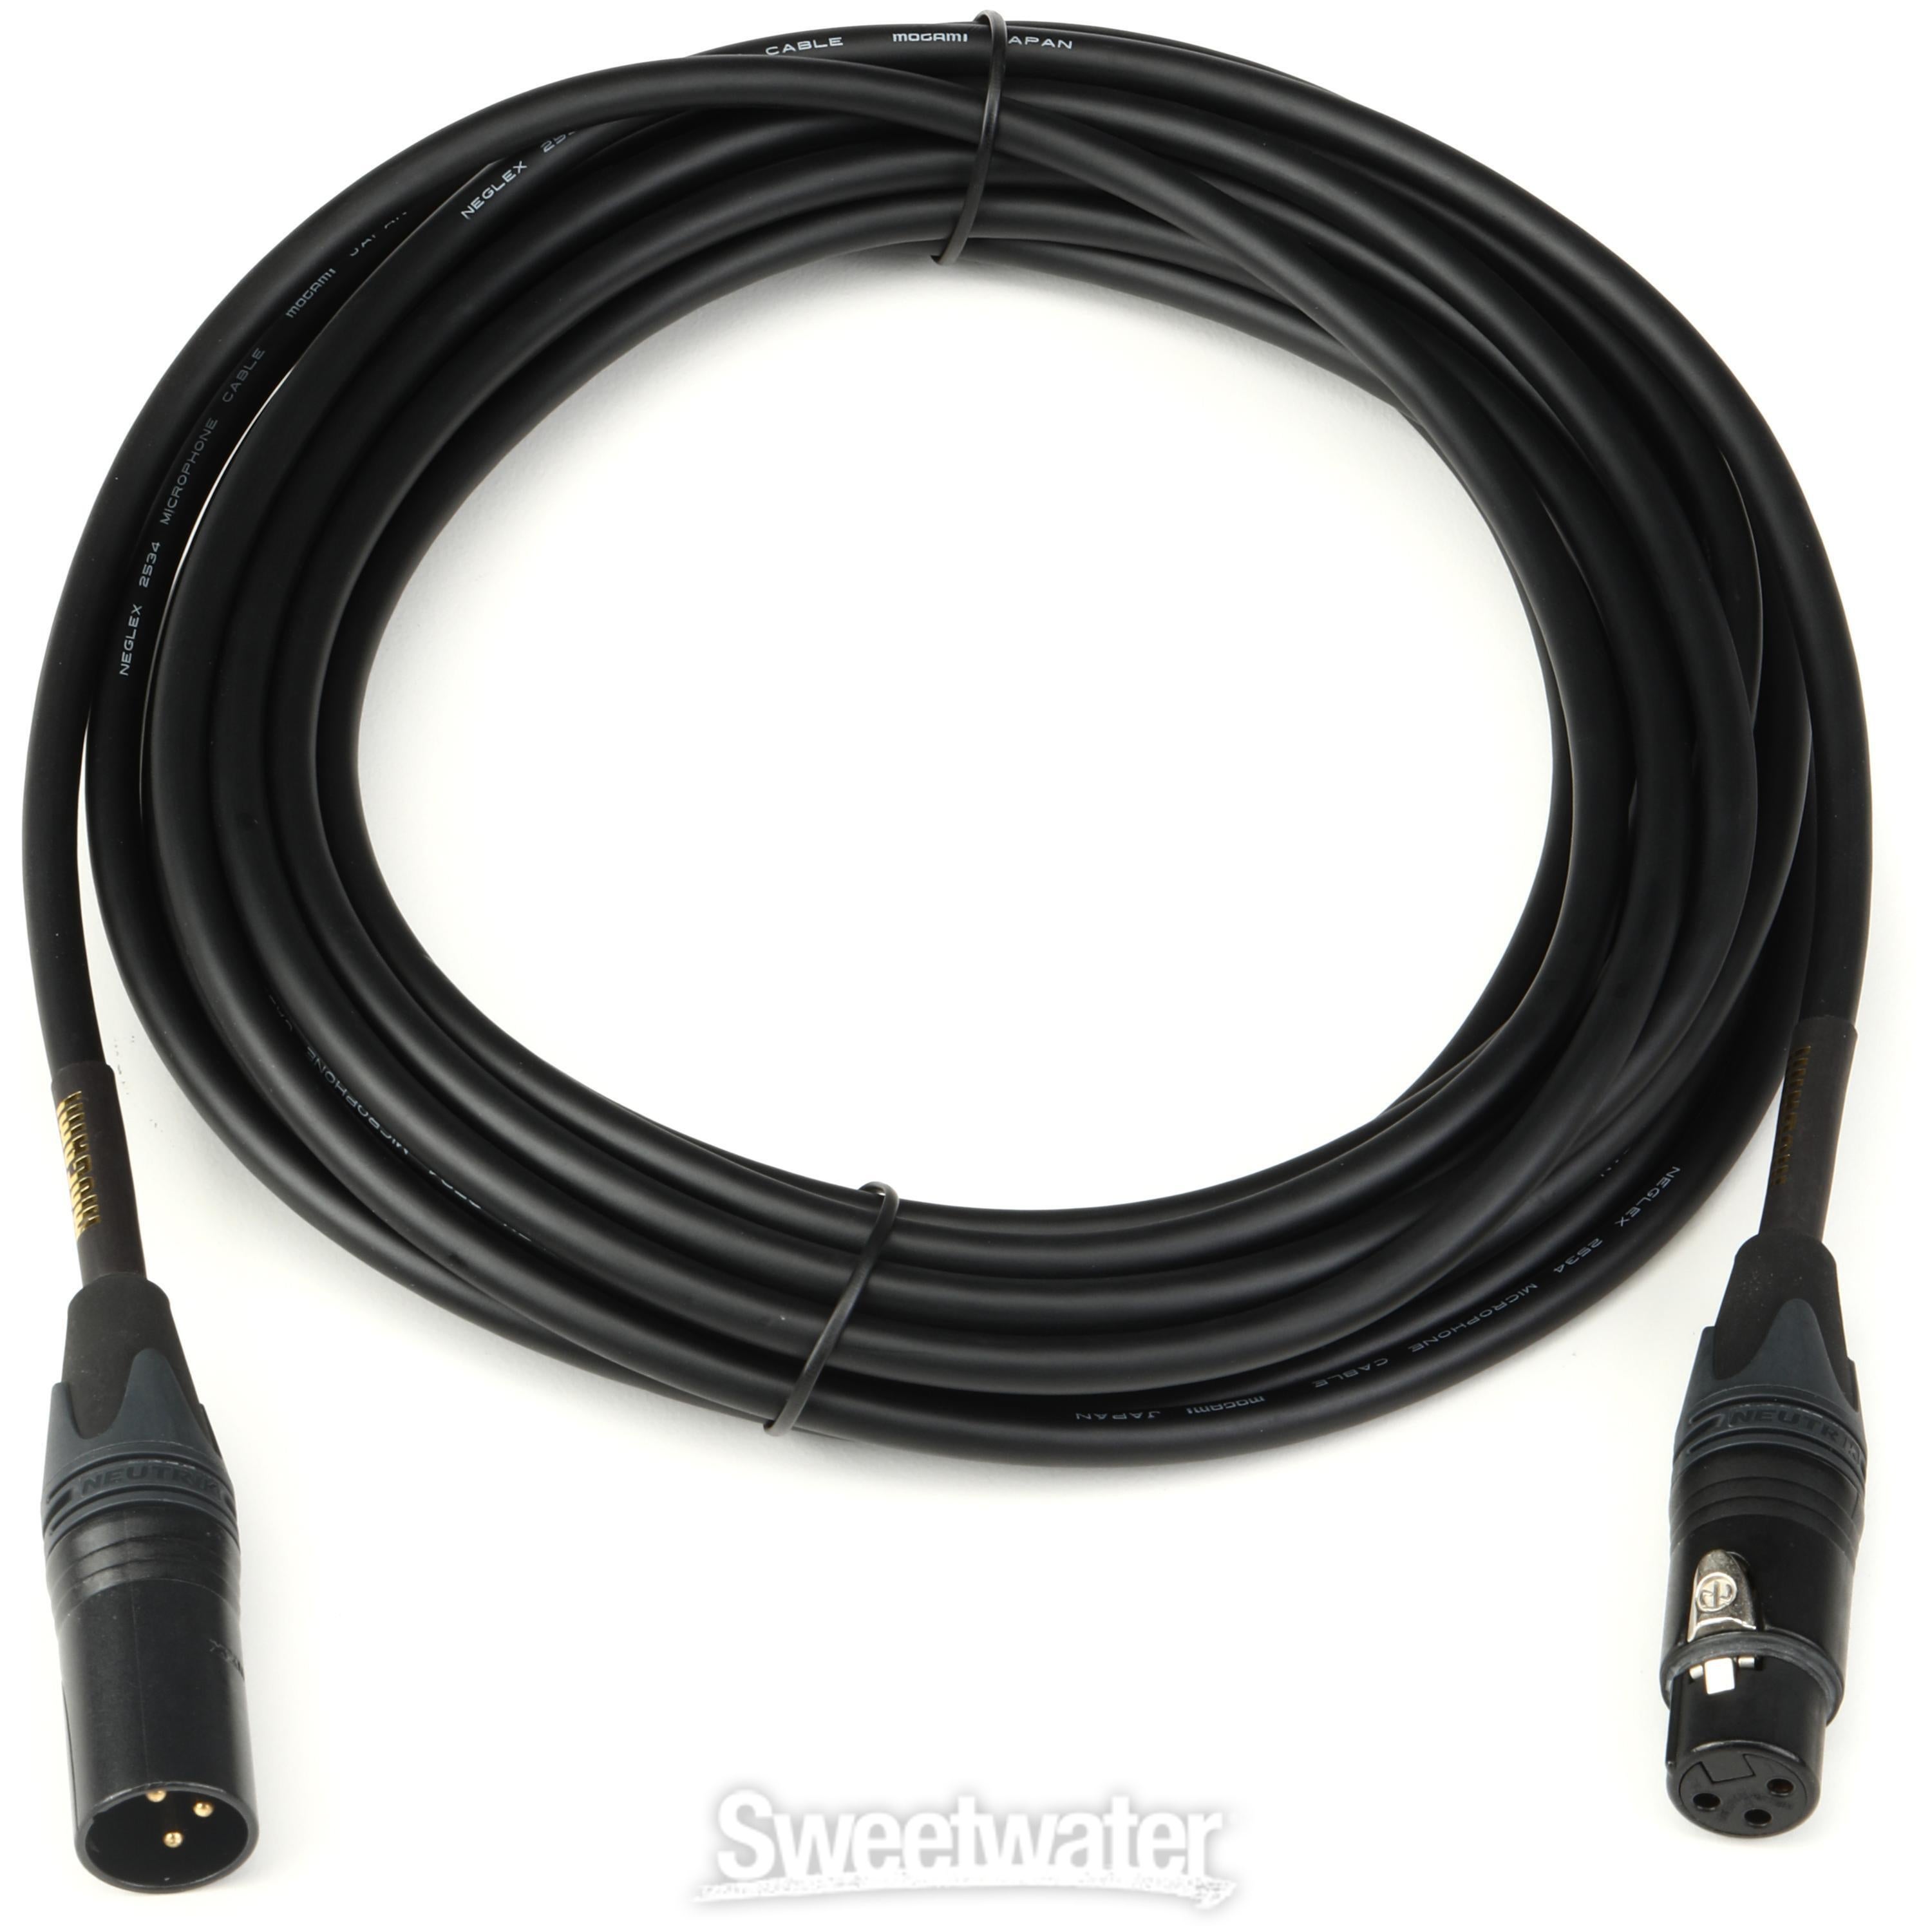 Mogami Gold Studio Microphone Cable - 25-foot | Sweetwater